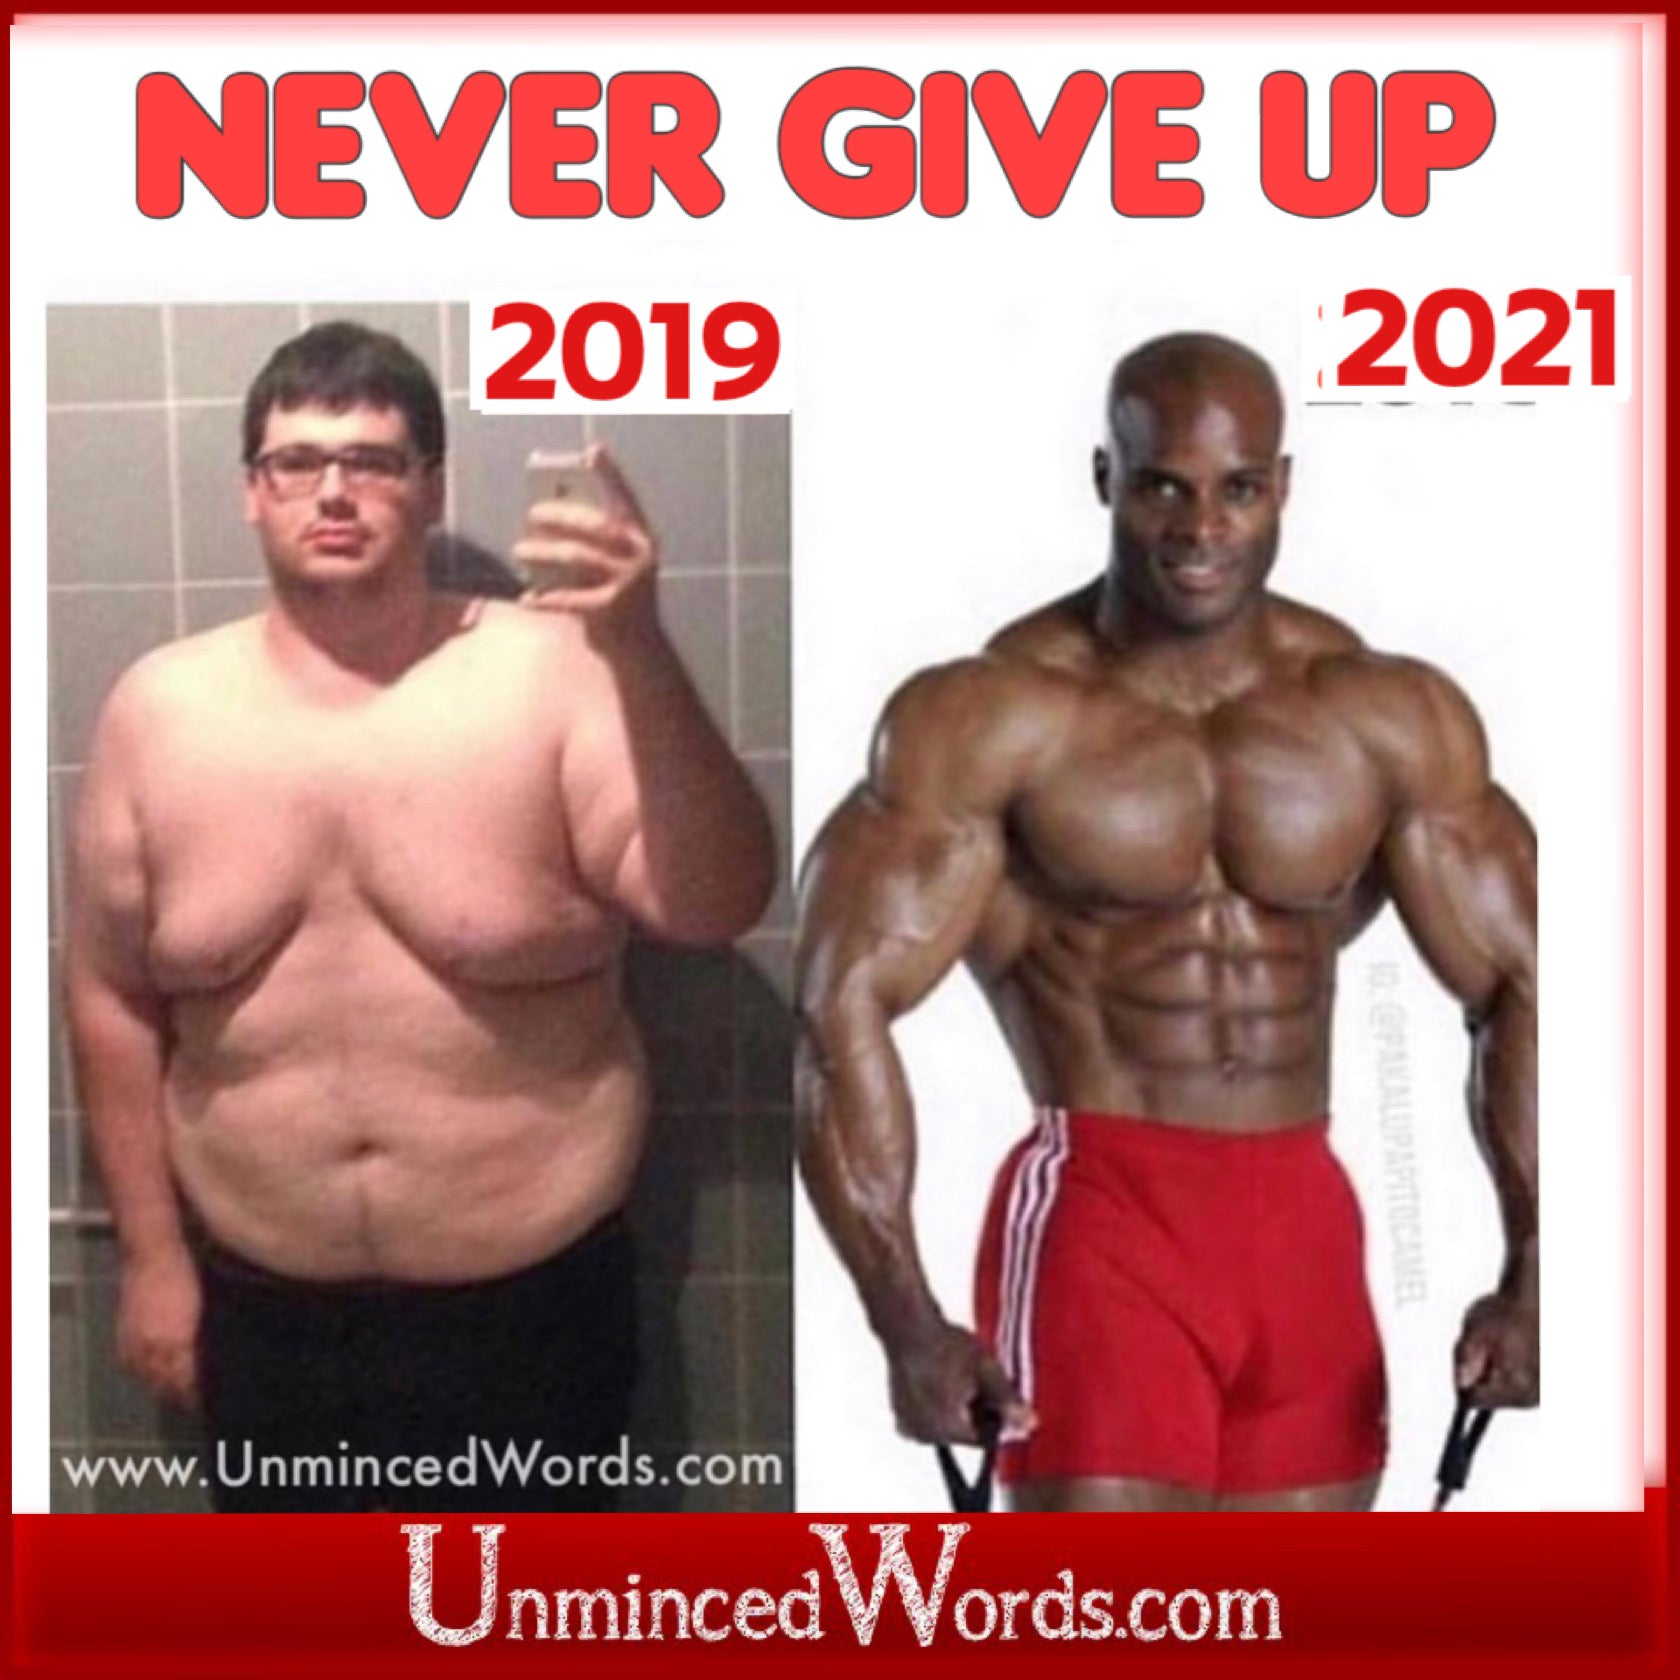 Never give up! Inspirational